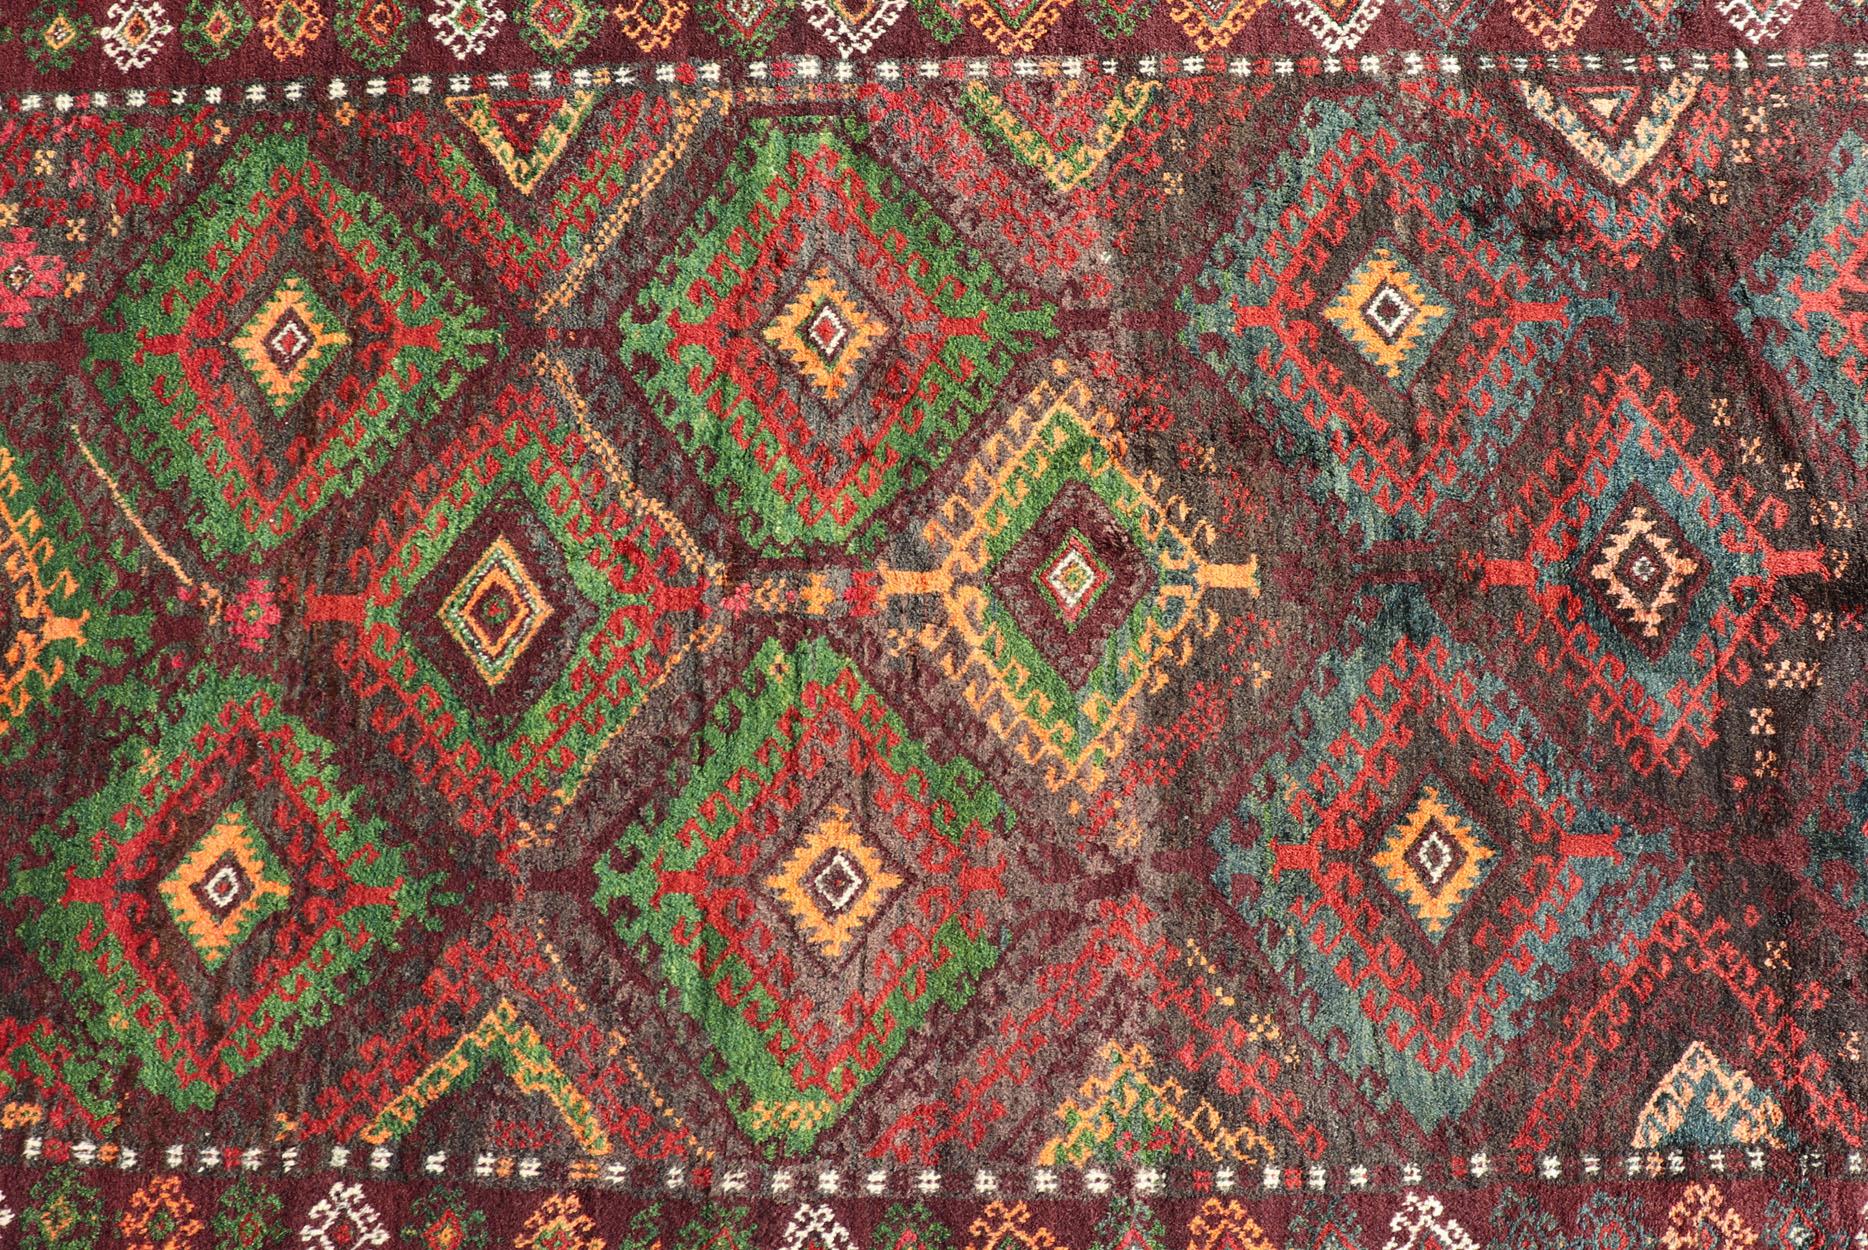 Antique Baluch tribal rug with all-over geometric in colorful design and motifs. Keivan Woven Arts, rug EMB-9680-P13558; country of origin / type: Iran / Baluch, circa 1930s.

This Antique Baluch Rug has been hand-knotted and features an